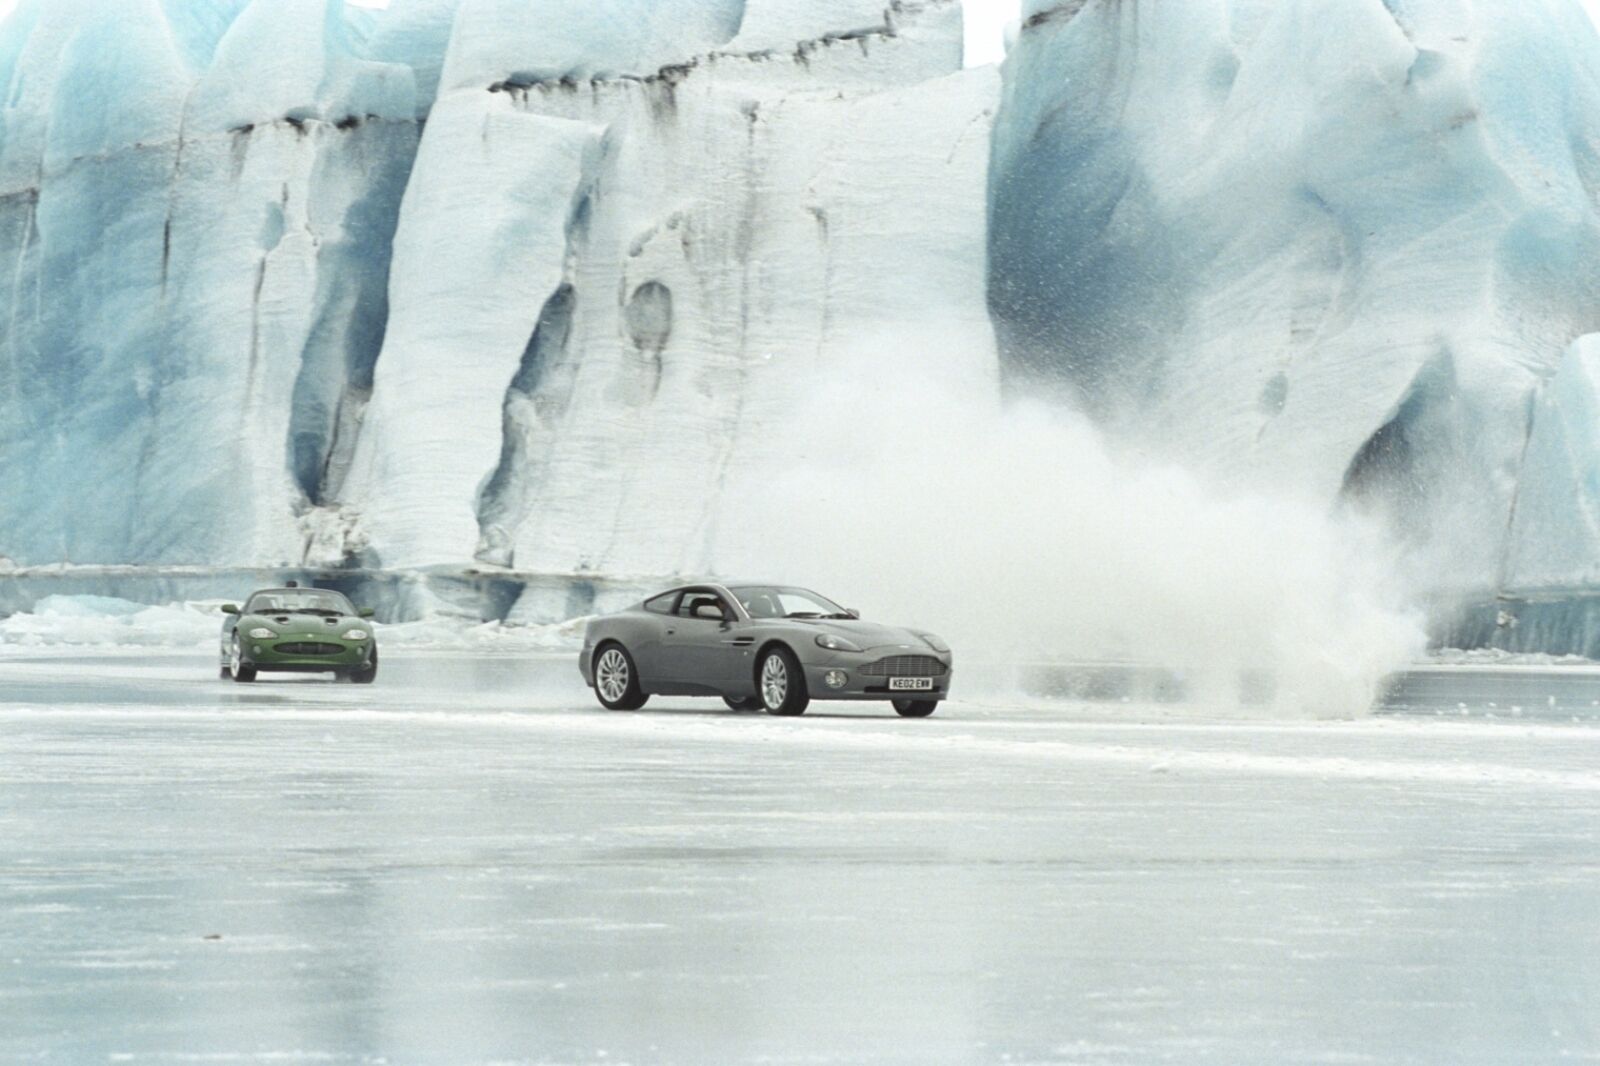 Cars in iceland for James Bond experiences